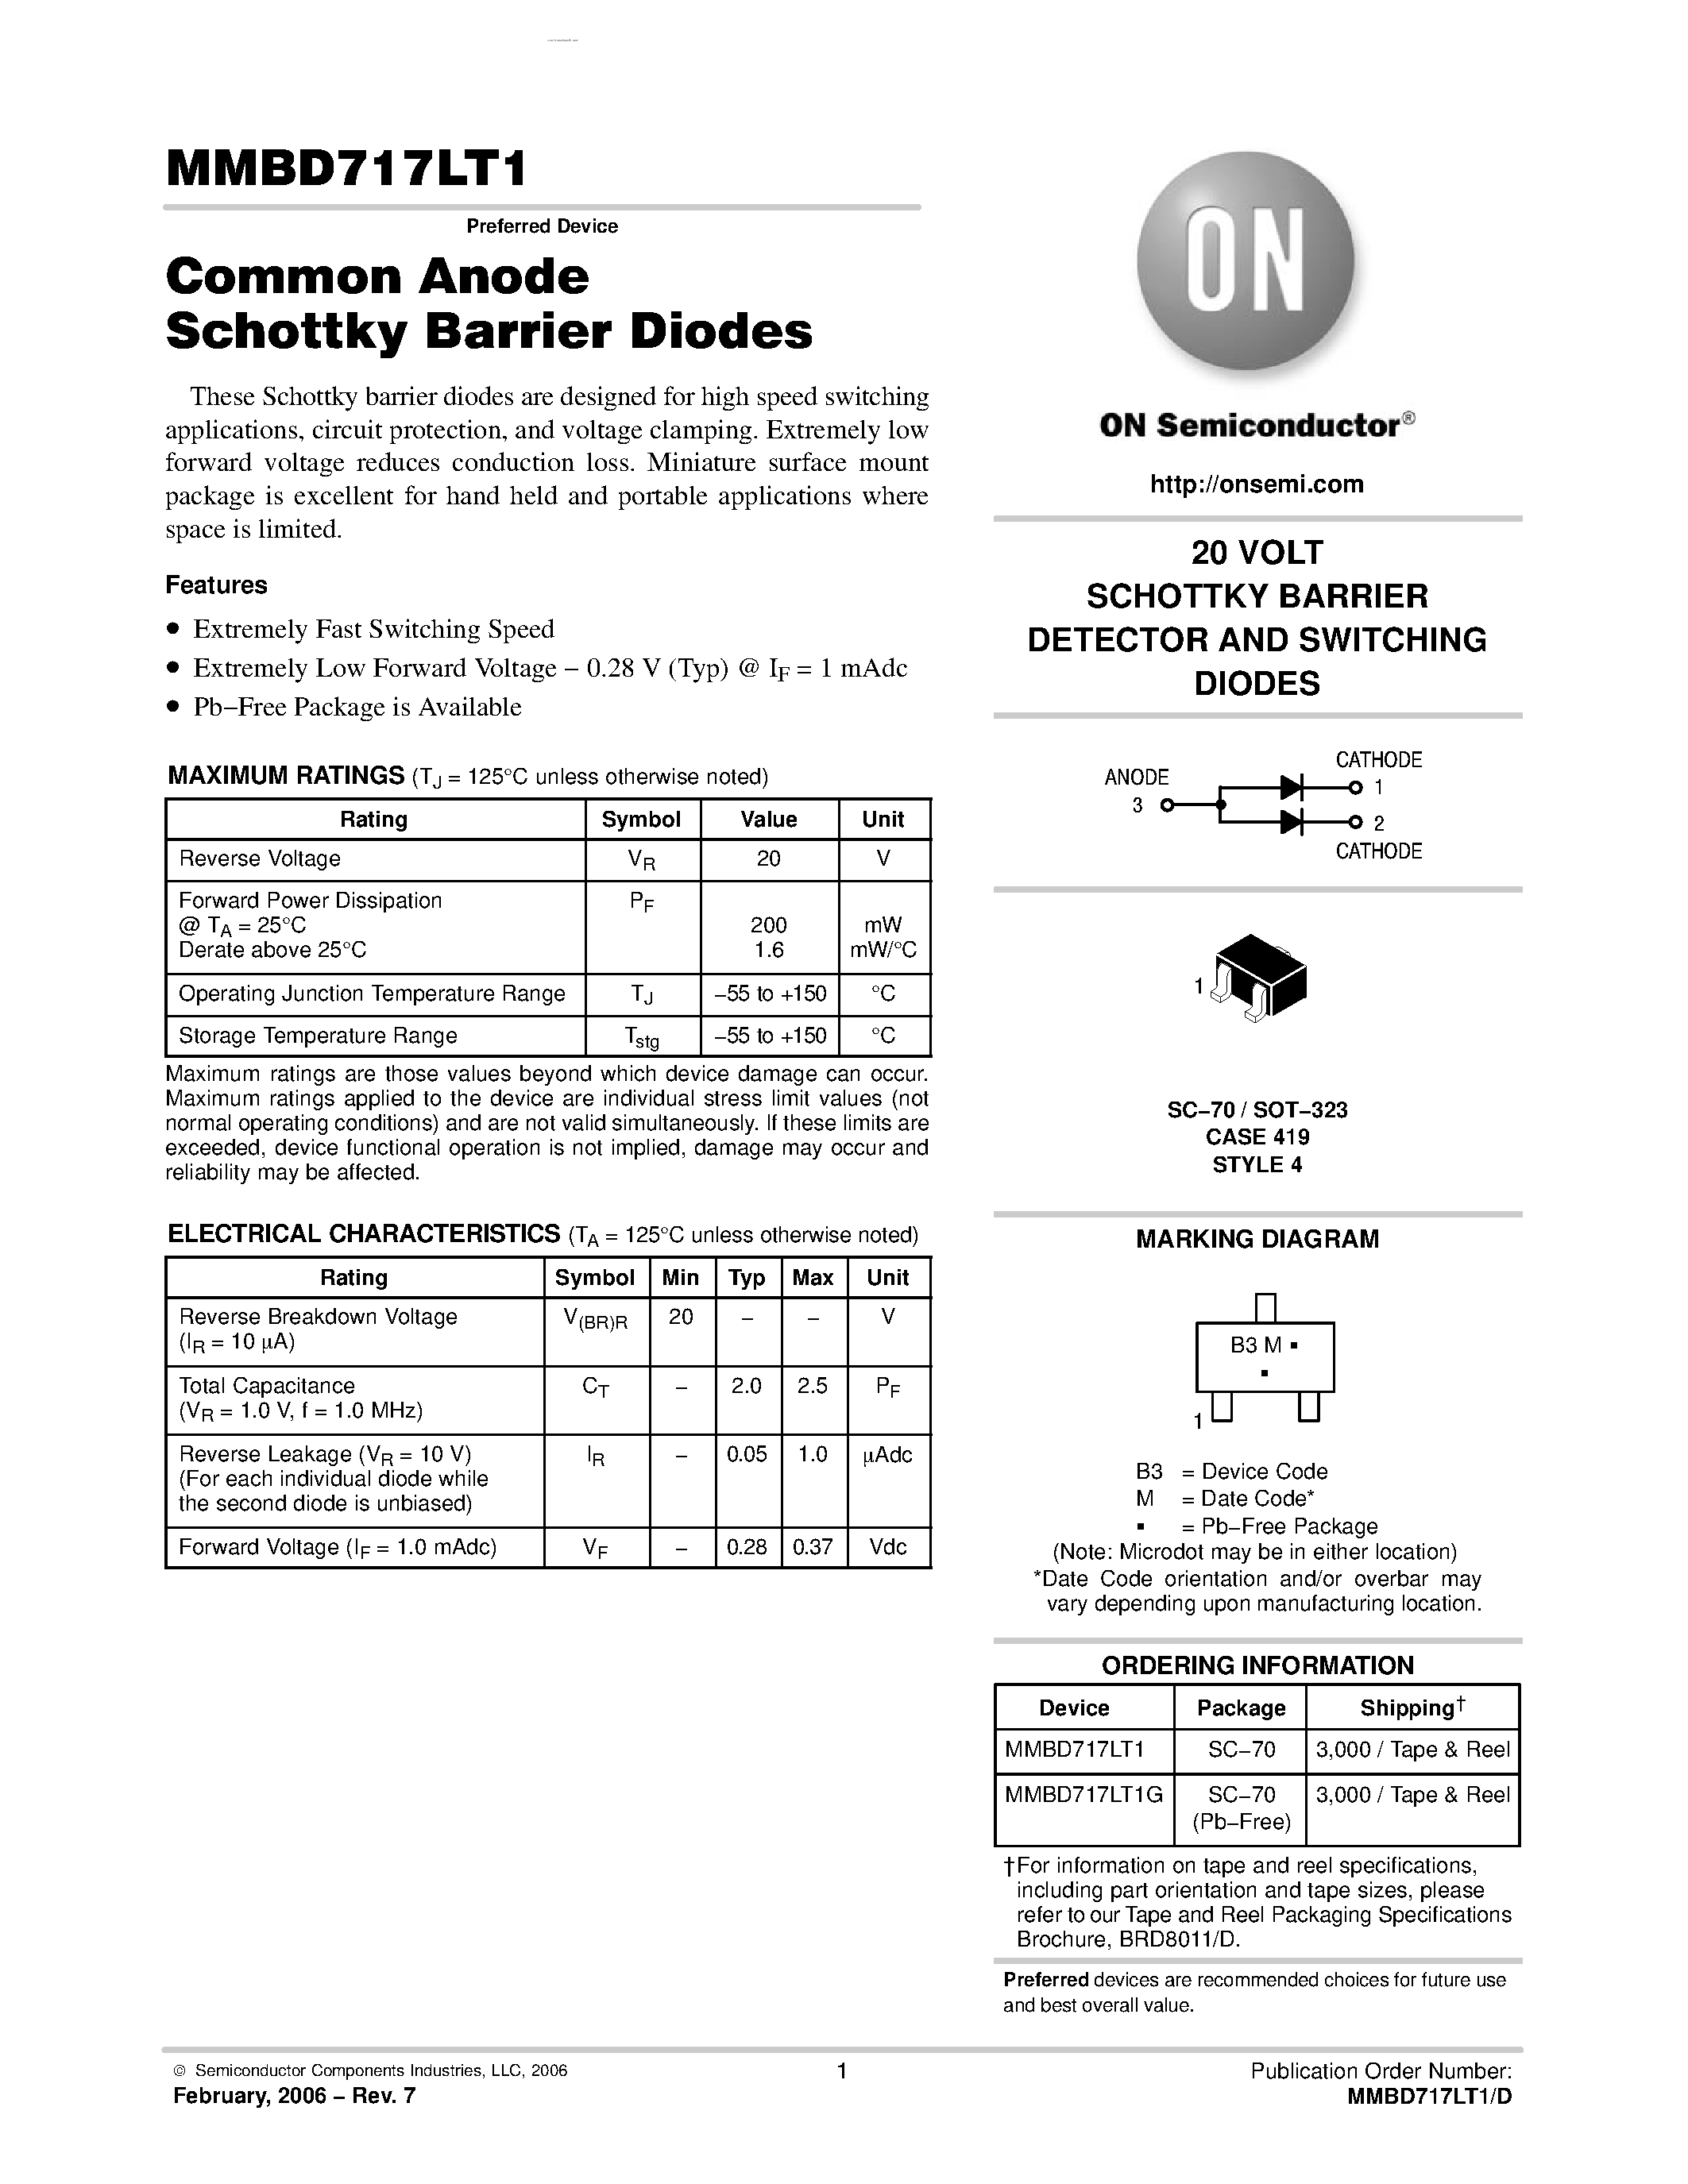 Datasheet MMBD717LT1D - Common Anode Schottky Barrier Diodes page 1